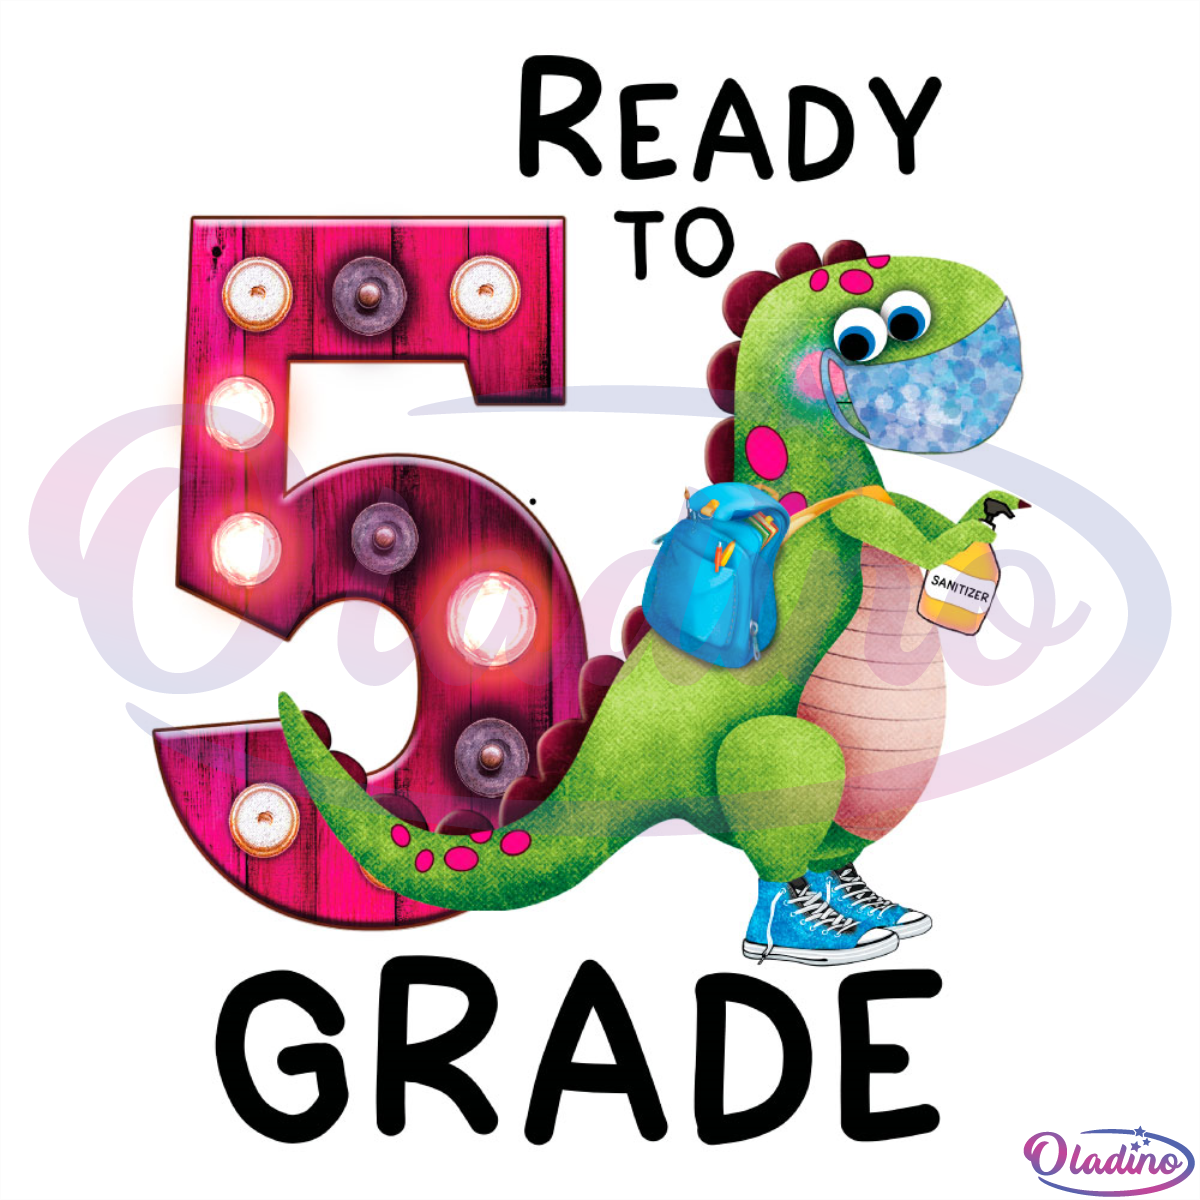 Ready to dinosaur 5th grade PNG sublimation